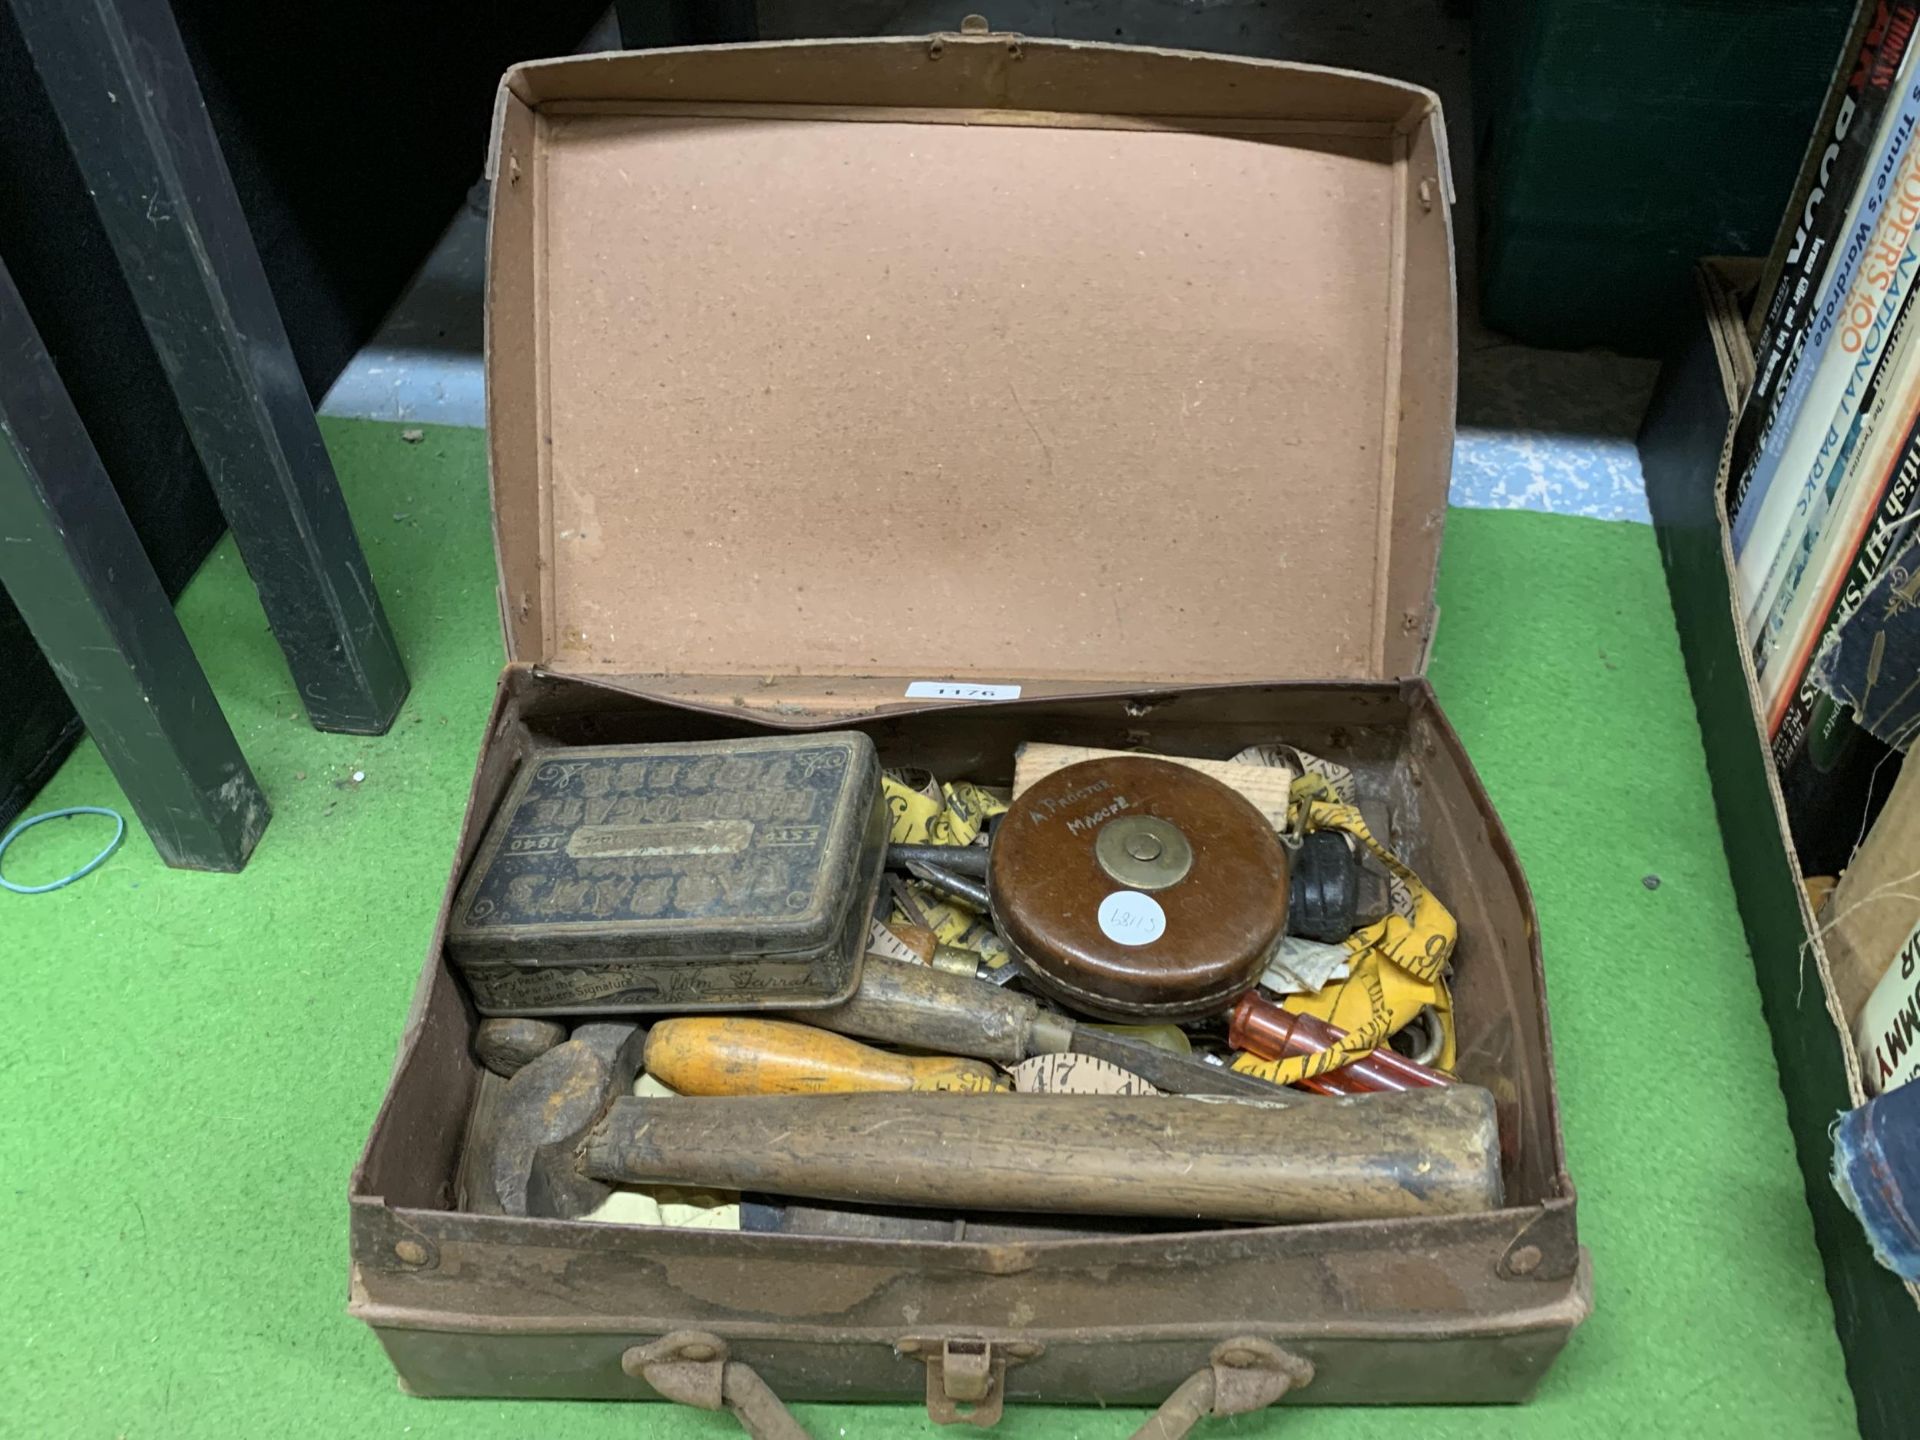 A SMALL VINTAGE CASE CONTAINING VINTAGE TOOLS, ETC